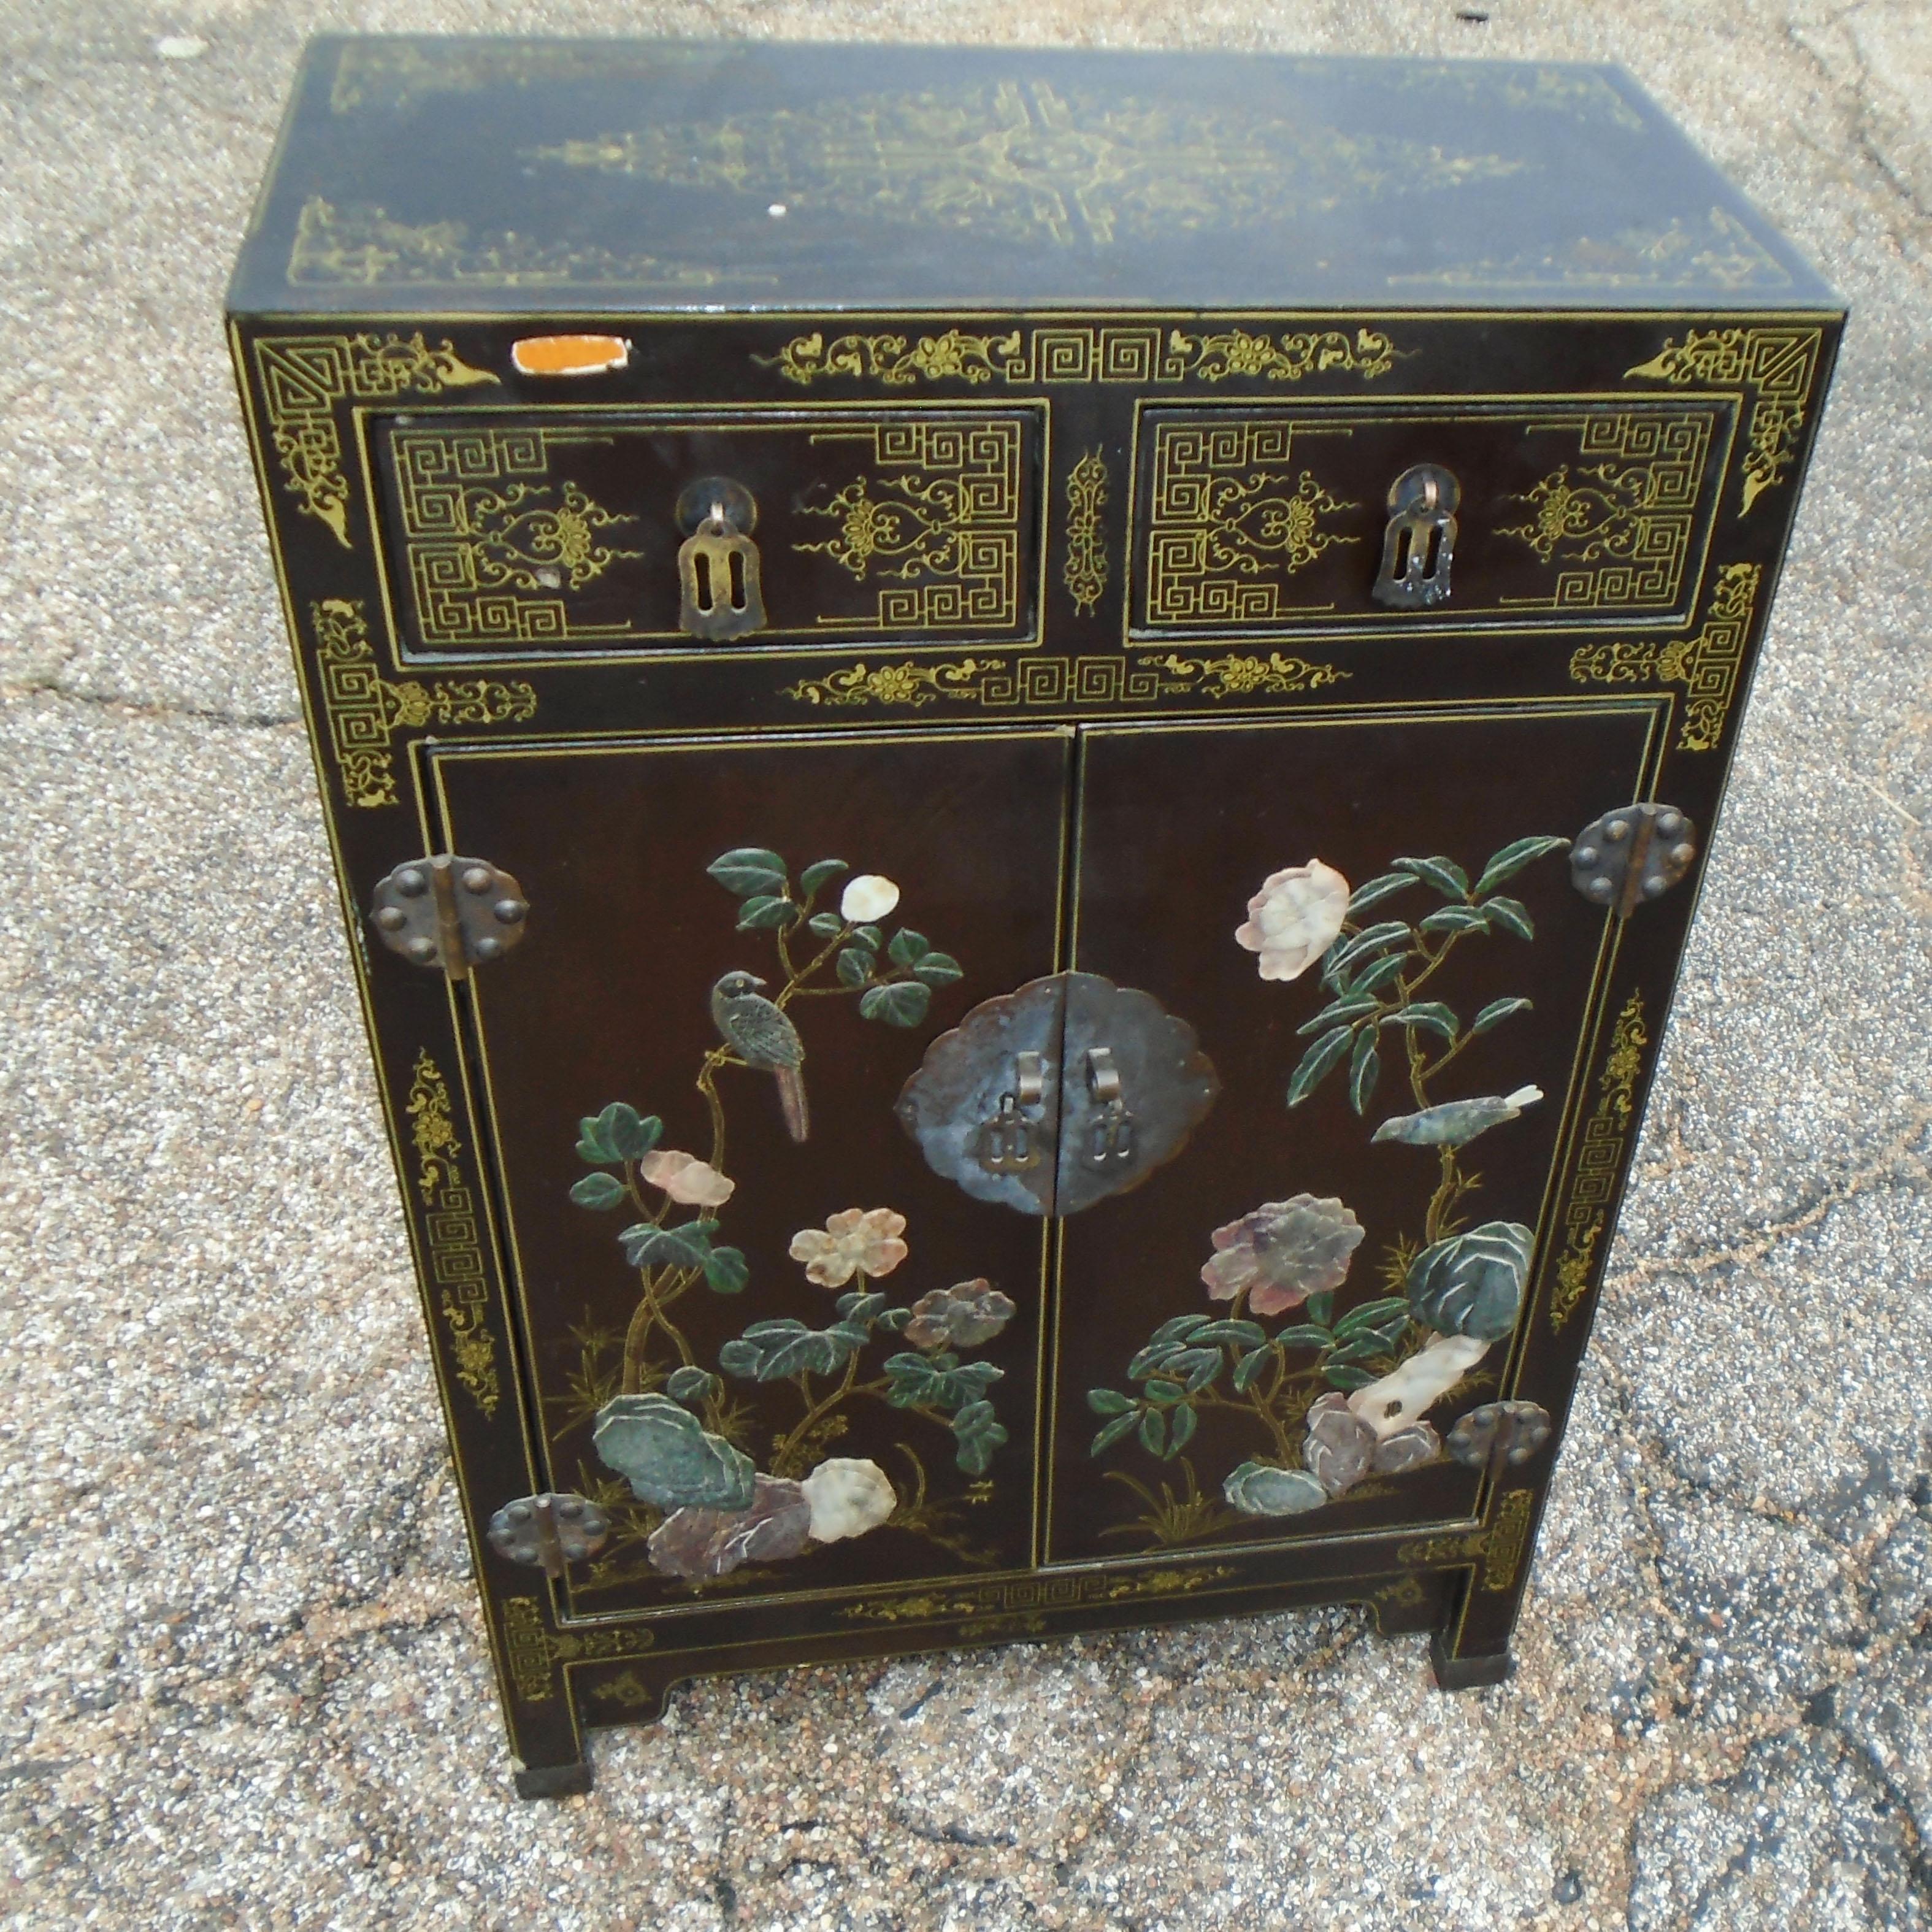 20th century lacquered wood small cabinet 
 
This beautifully detailed small piece is a perfect example of a chinoiserie cabinet from the early 20th century from China. The oriental bird and flower mother-of-pearl appliques are hand painted and